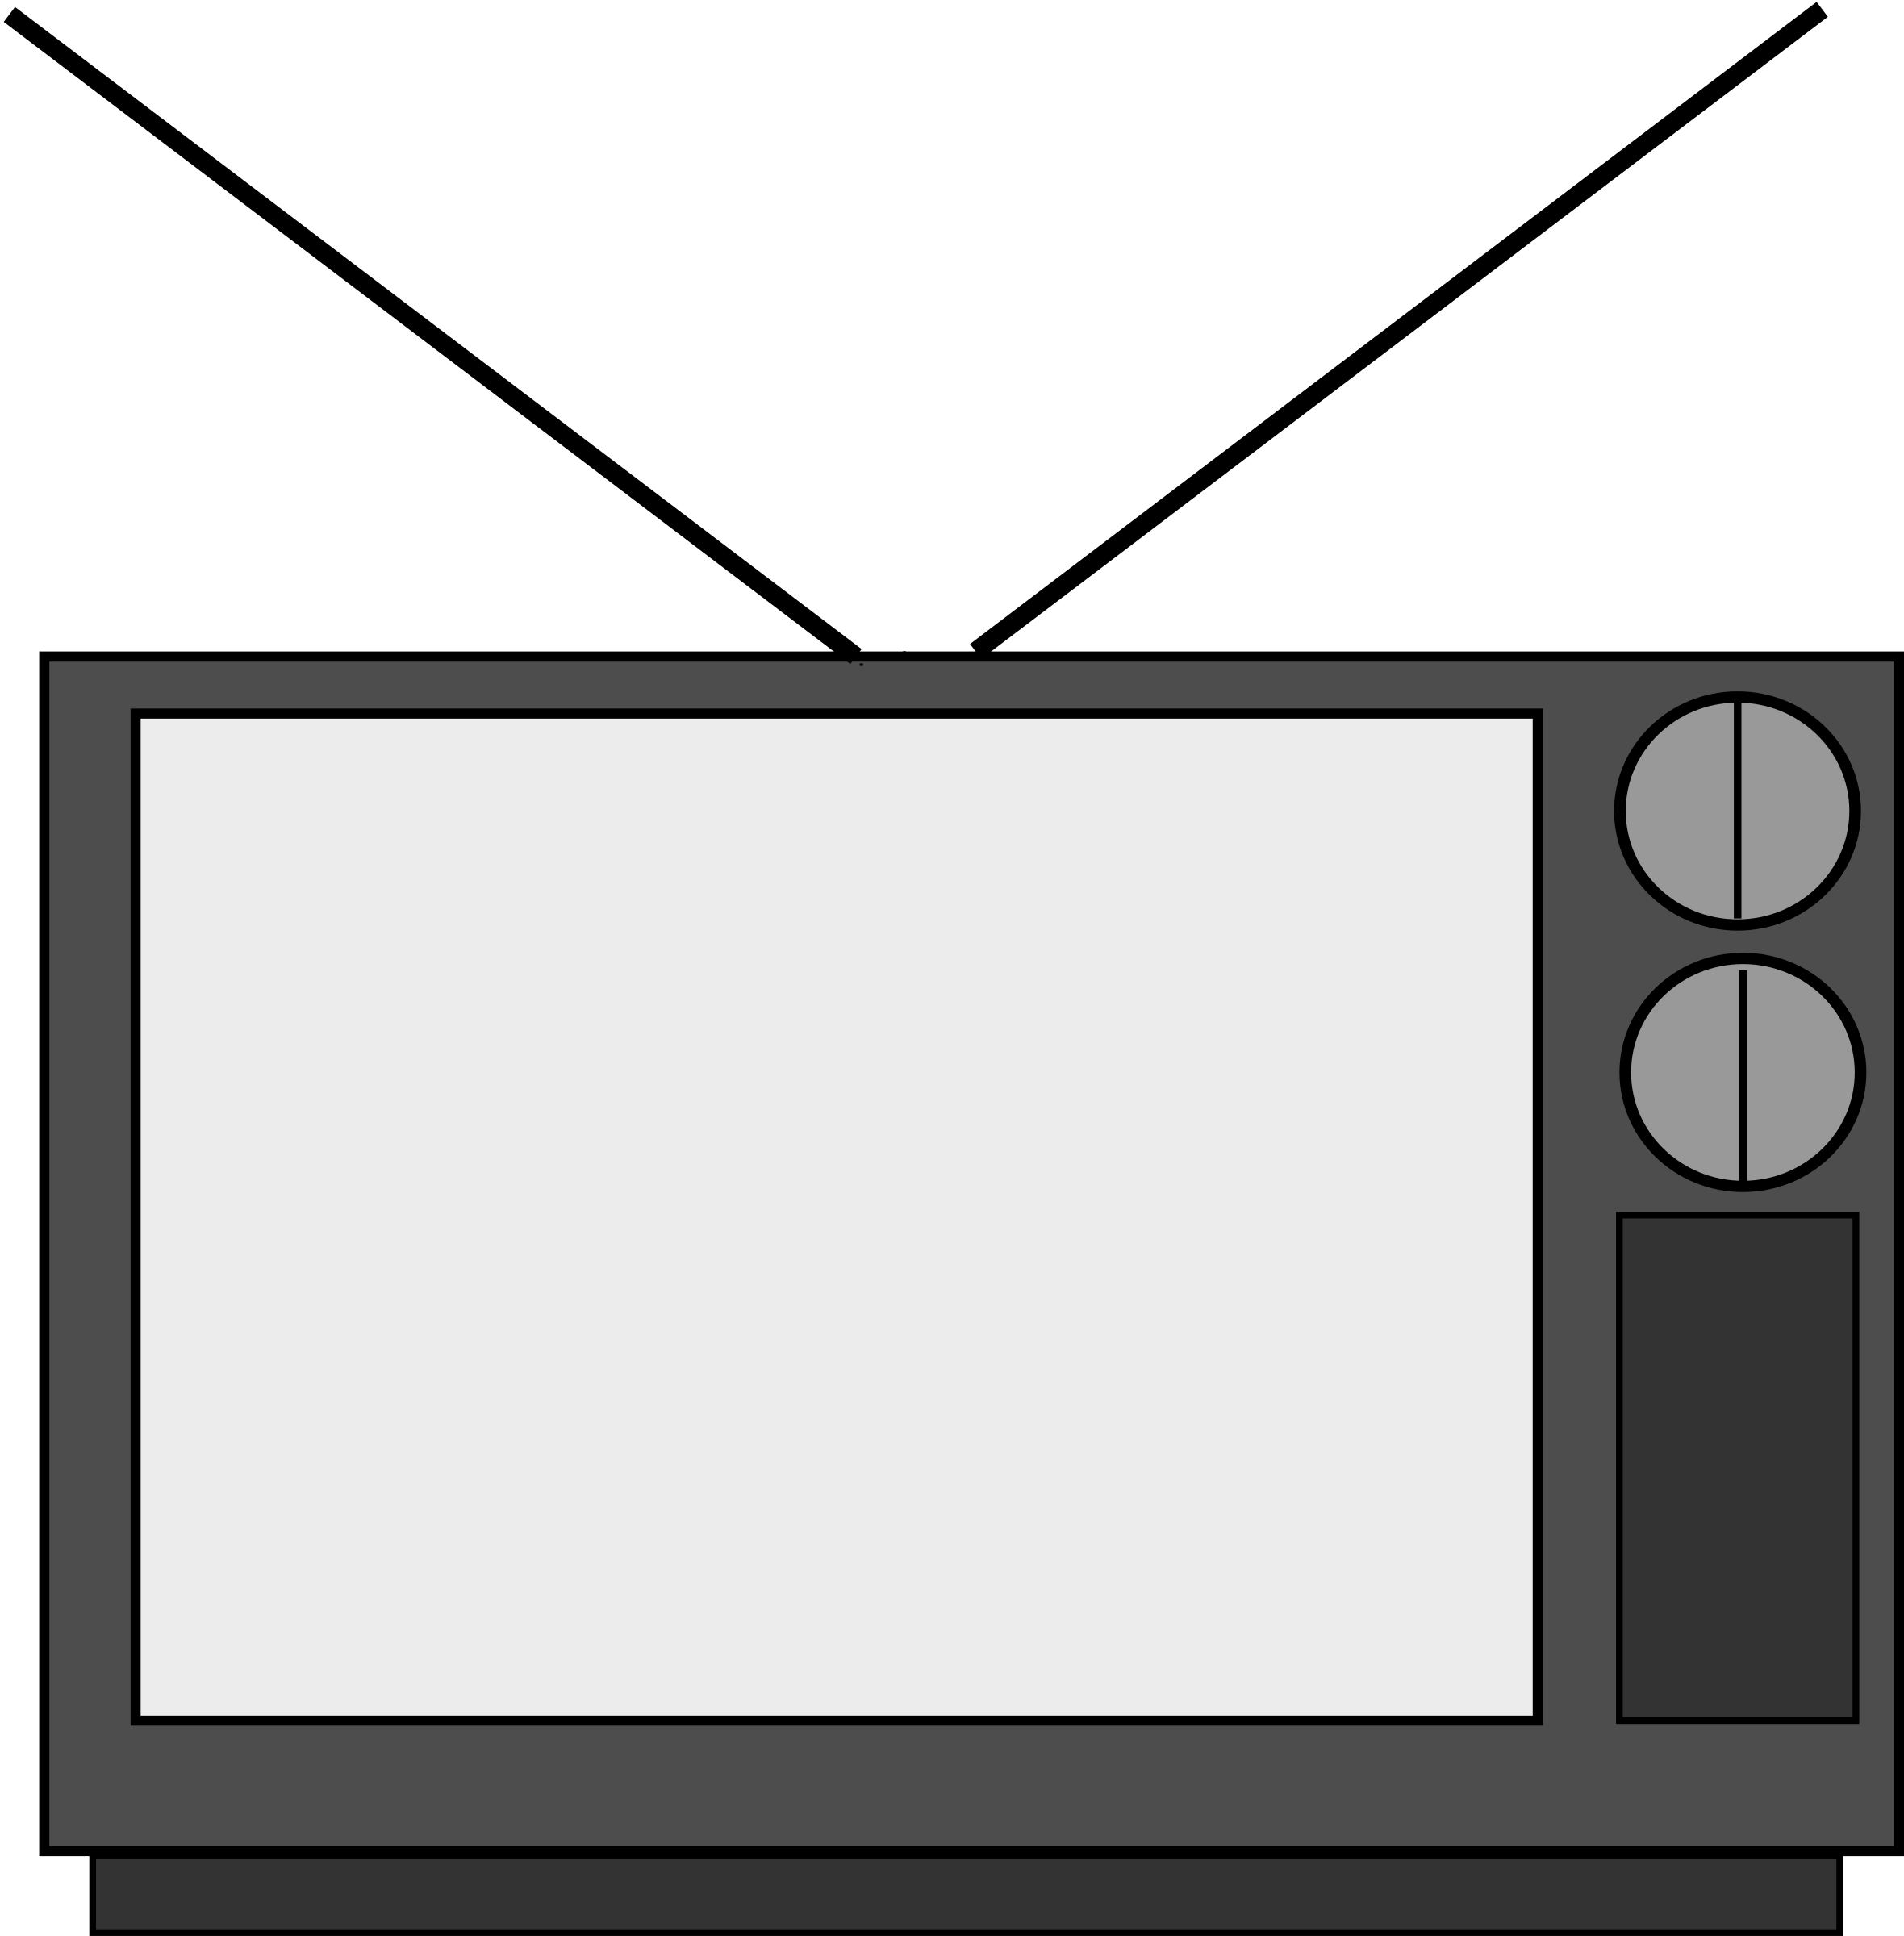 A Cartoon Of A Television